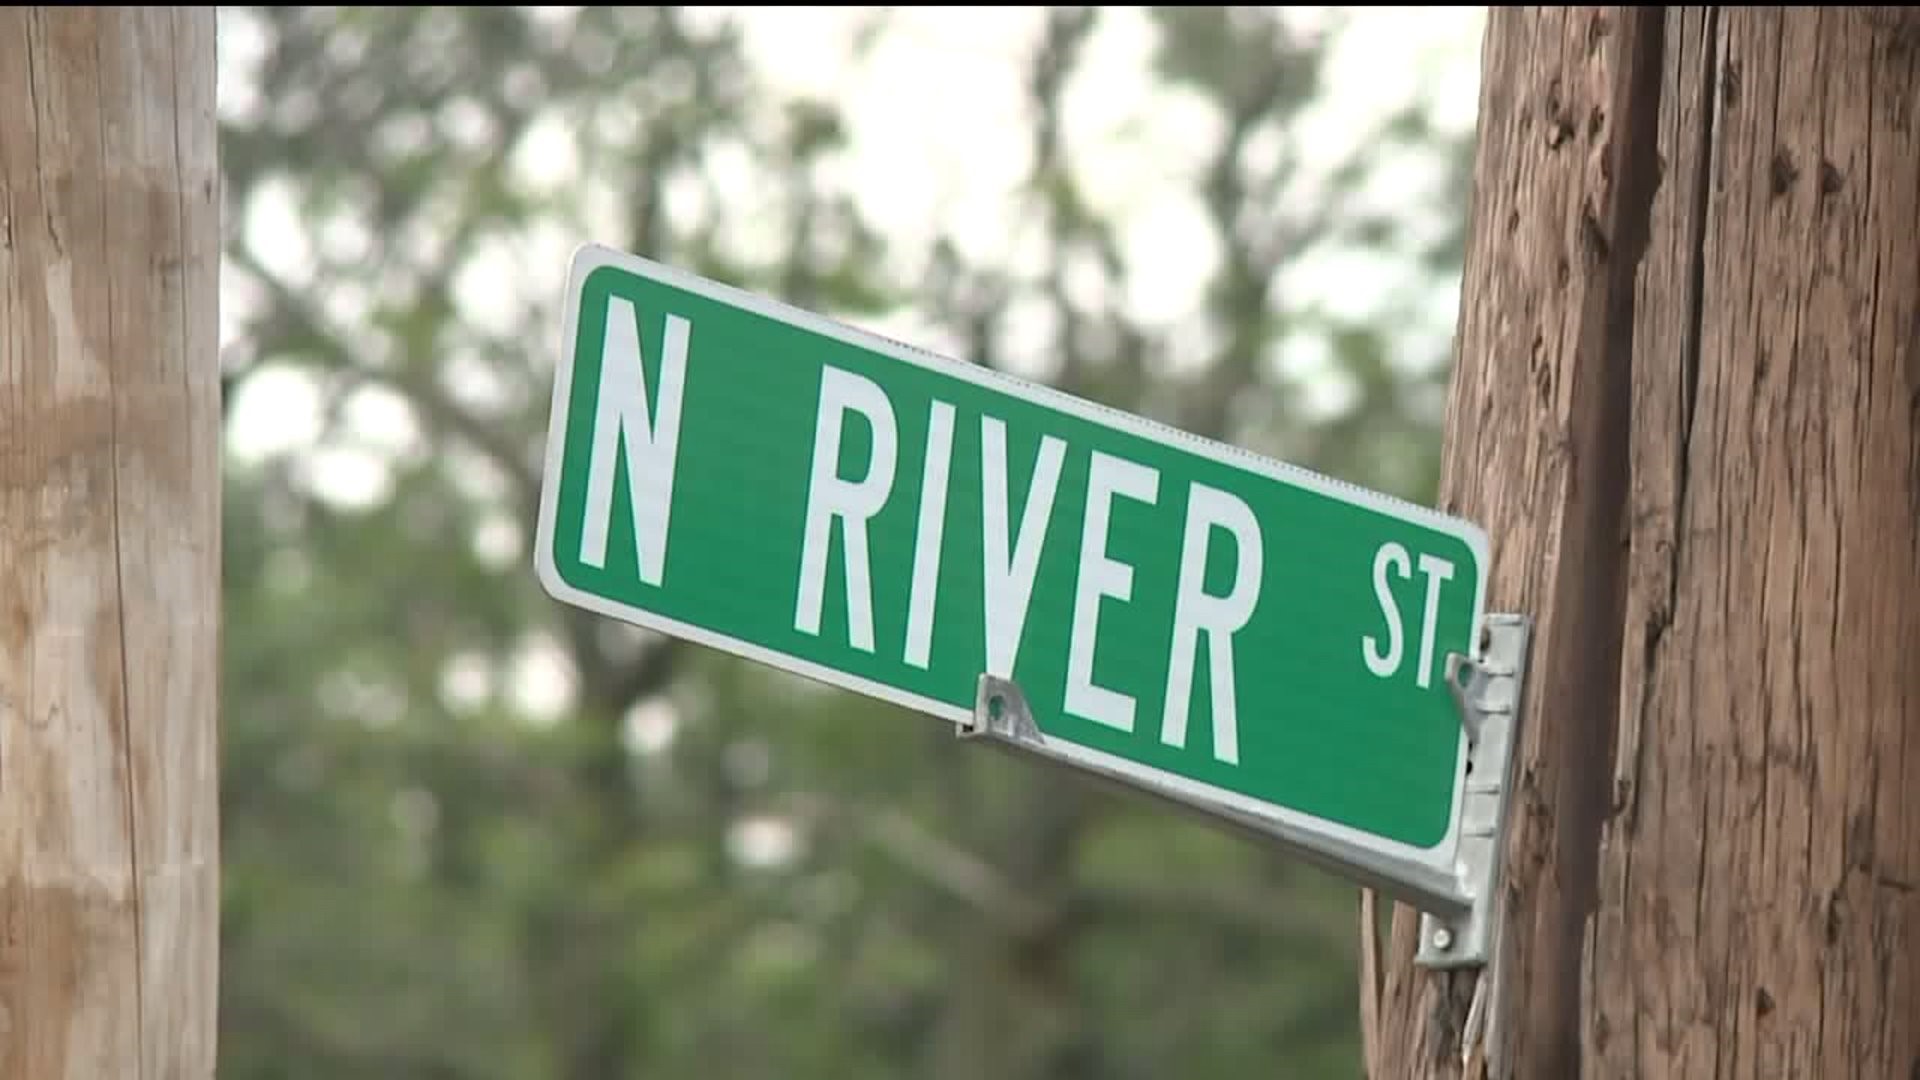 River Street Pipe Replacement Project Expected to Take Weeks